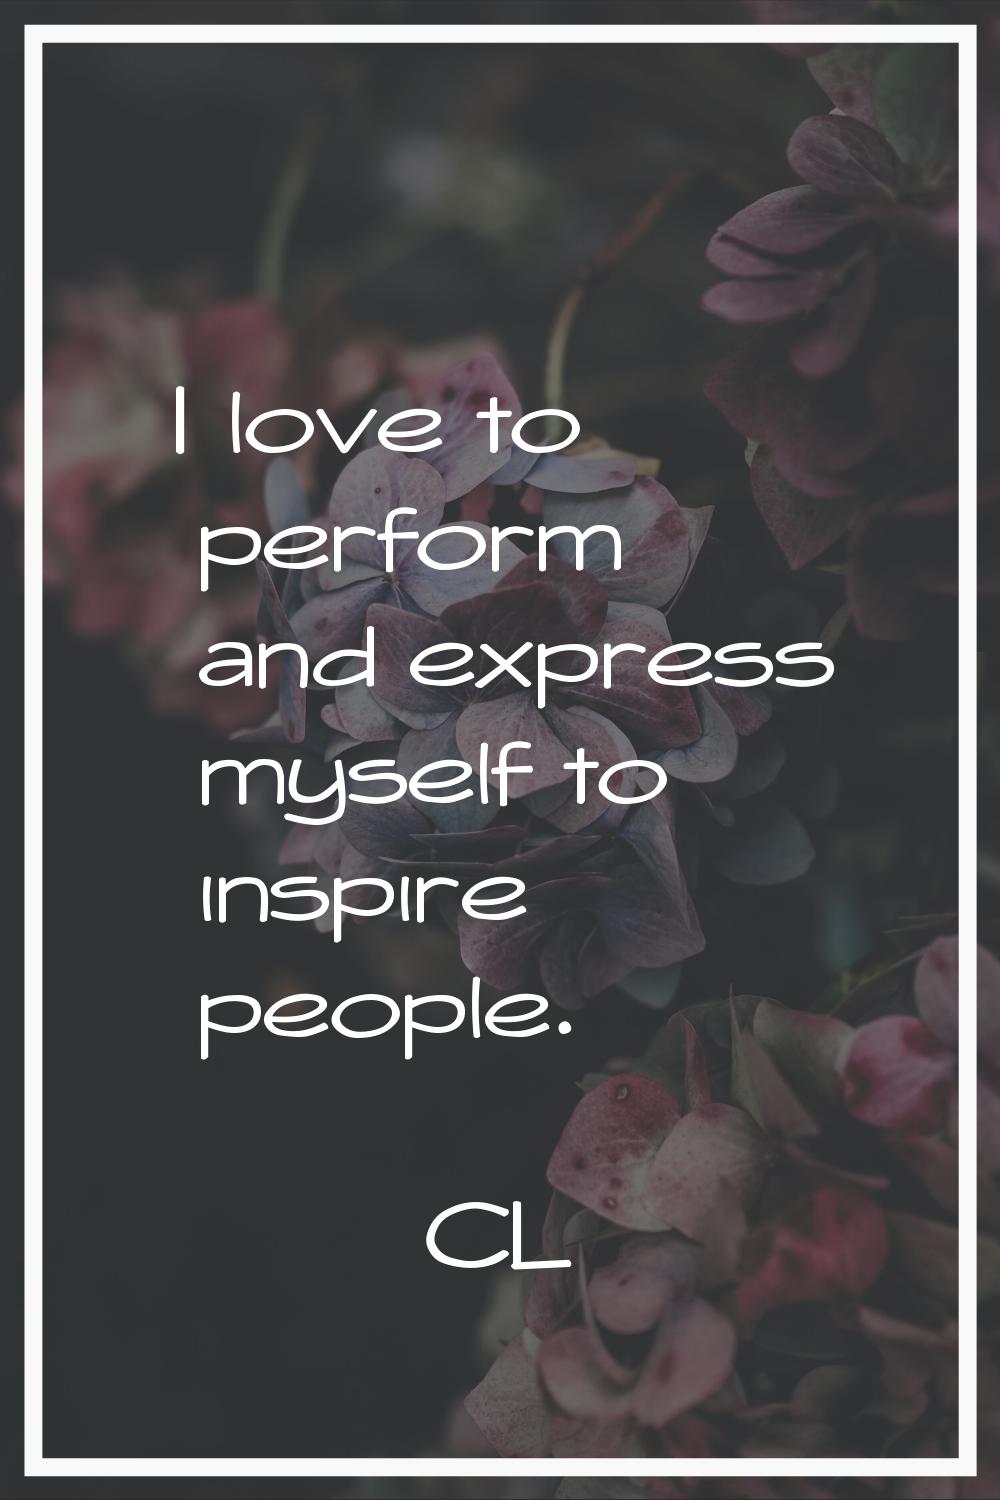 I love to perform and express myself to inspire people.